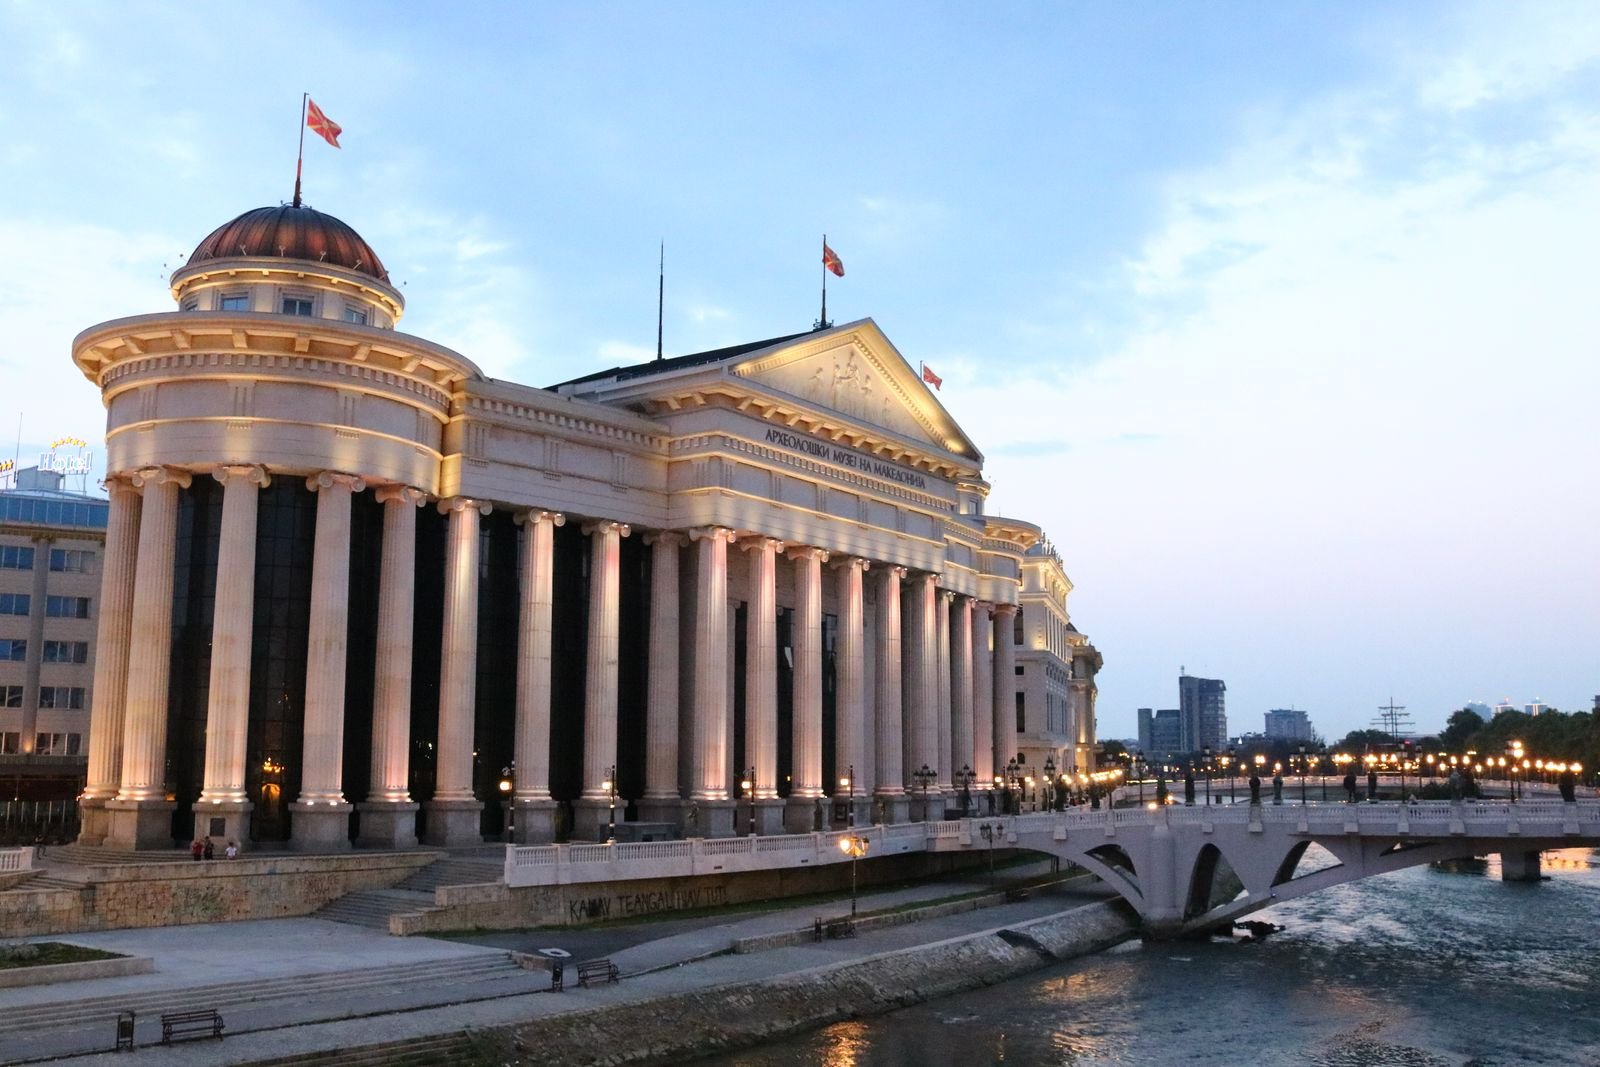 grand building with pillars lit up at dusk